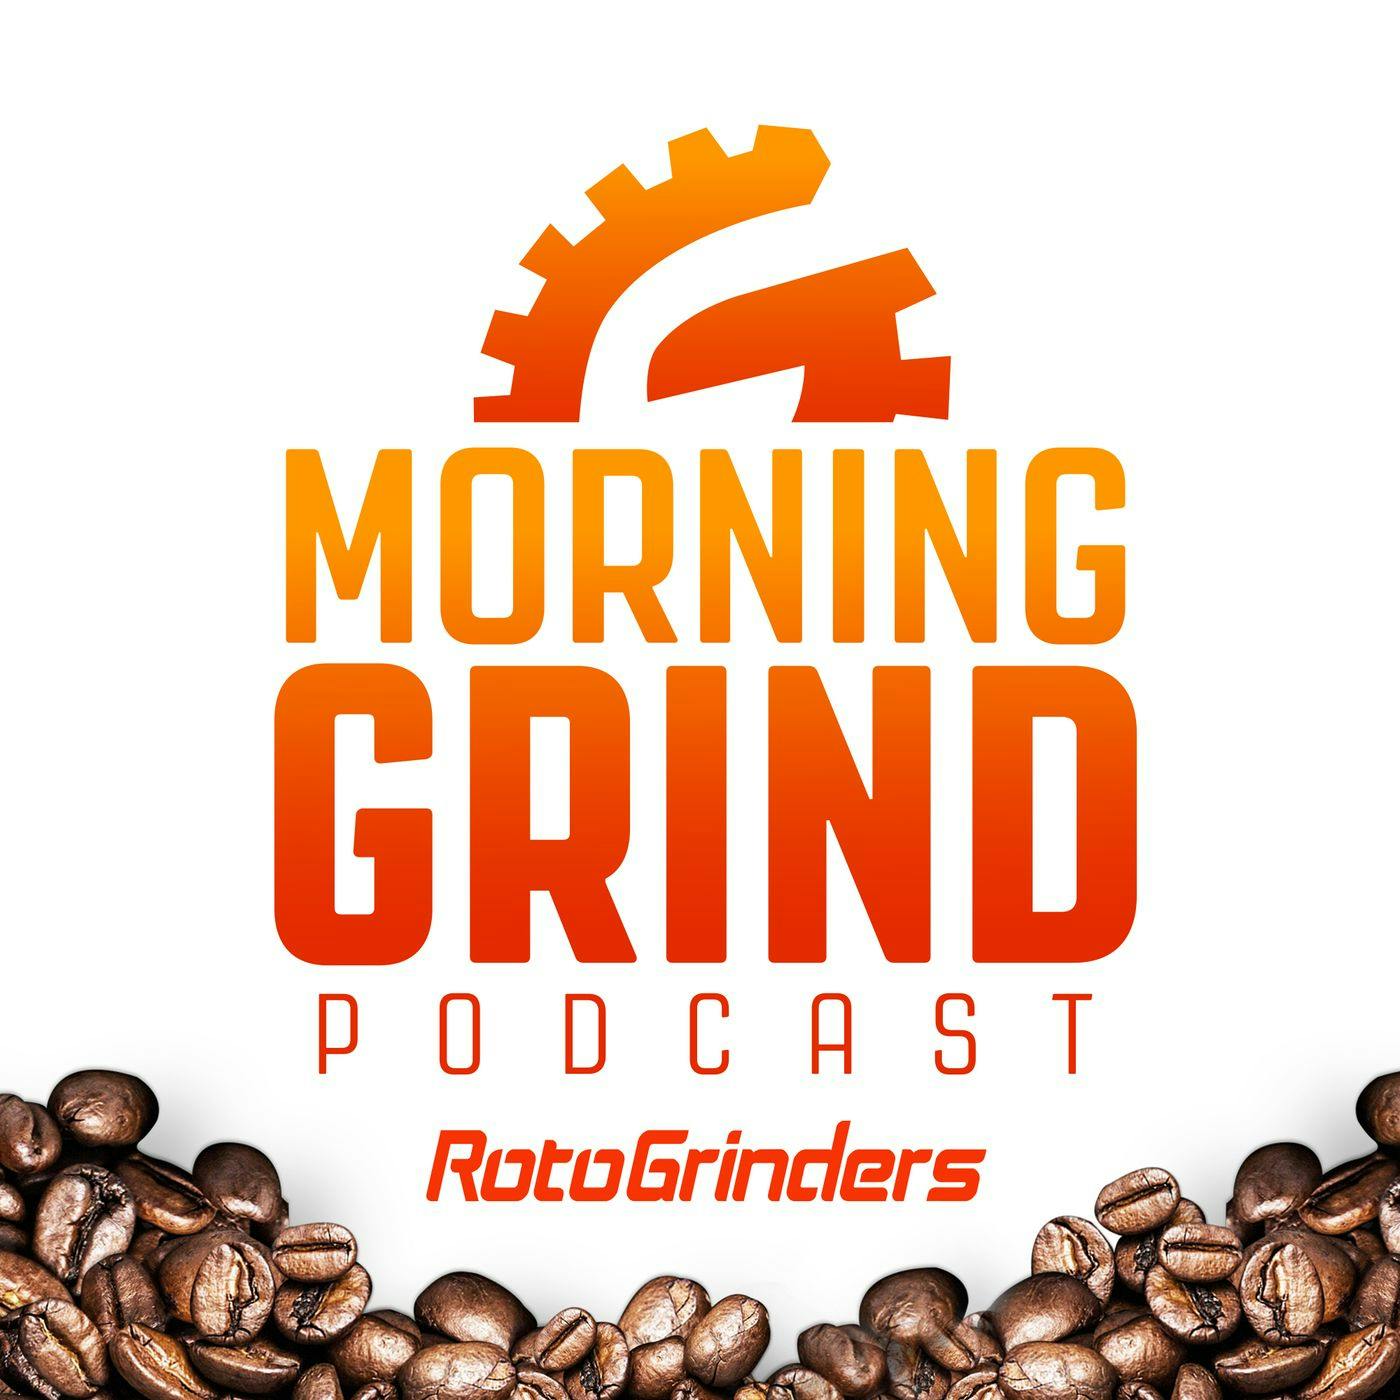 NBA Morning Grind: 3/30/2022 - I Want His Under On Point Rebound Assist